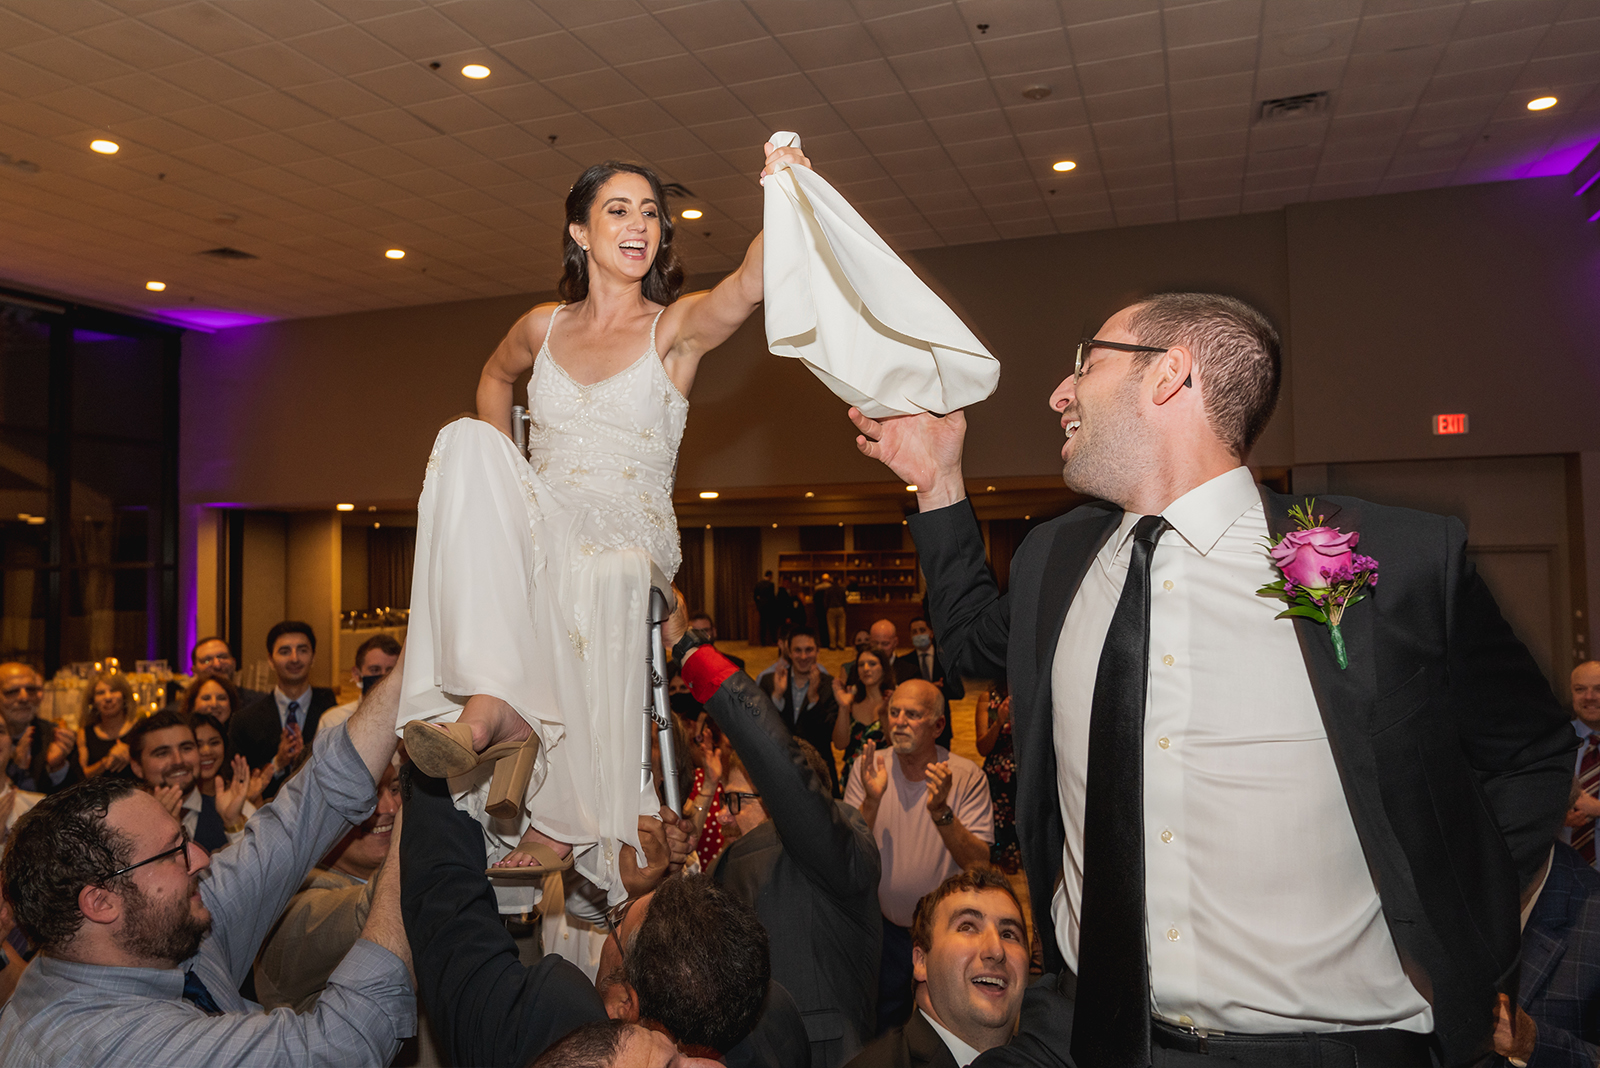 Bride and groom in chairs, dance, fun, candid wedding photo, Jewish wedding, classy wedding ceremony at Landerhaven, Mayfield Heights OH